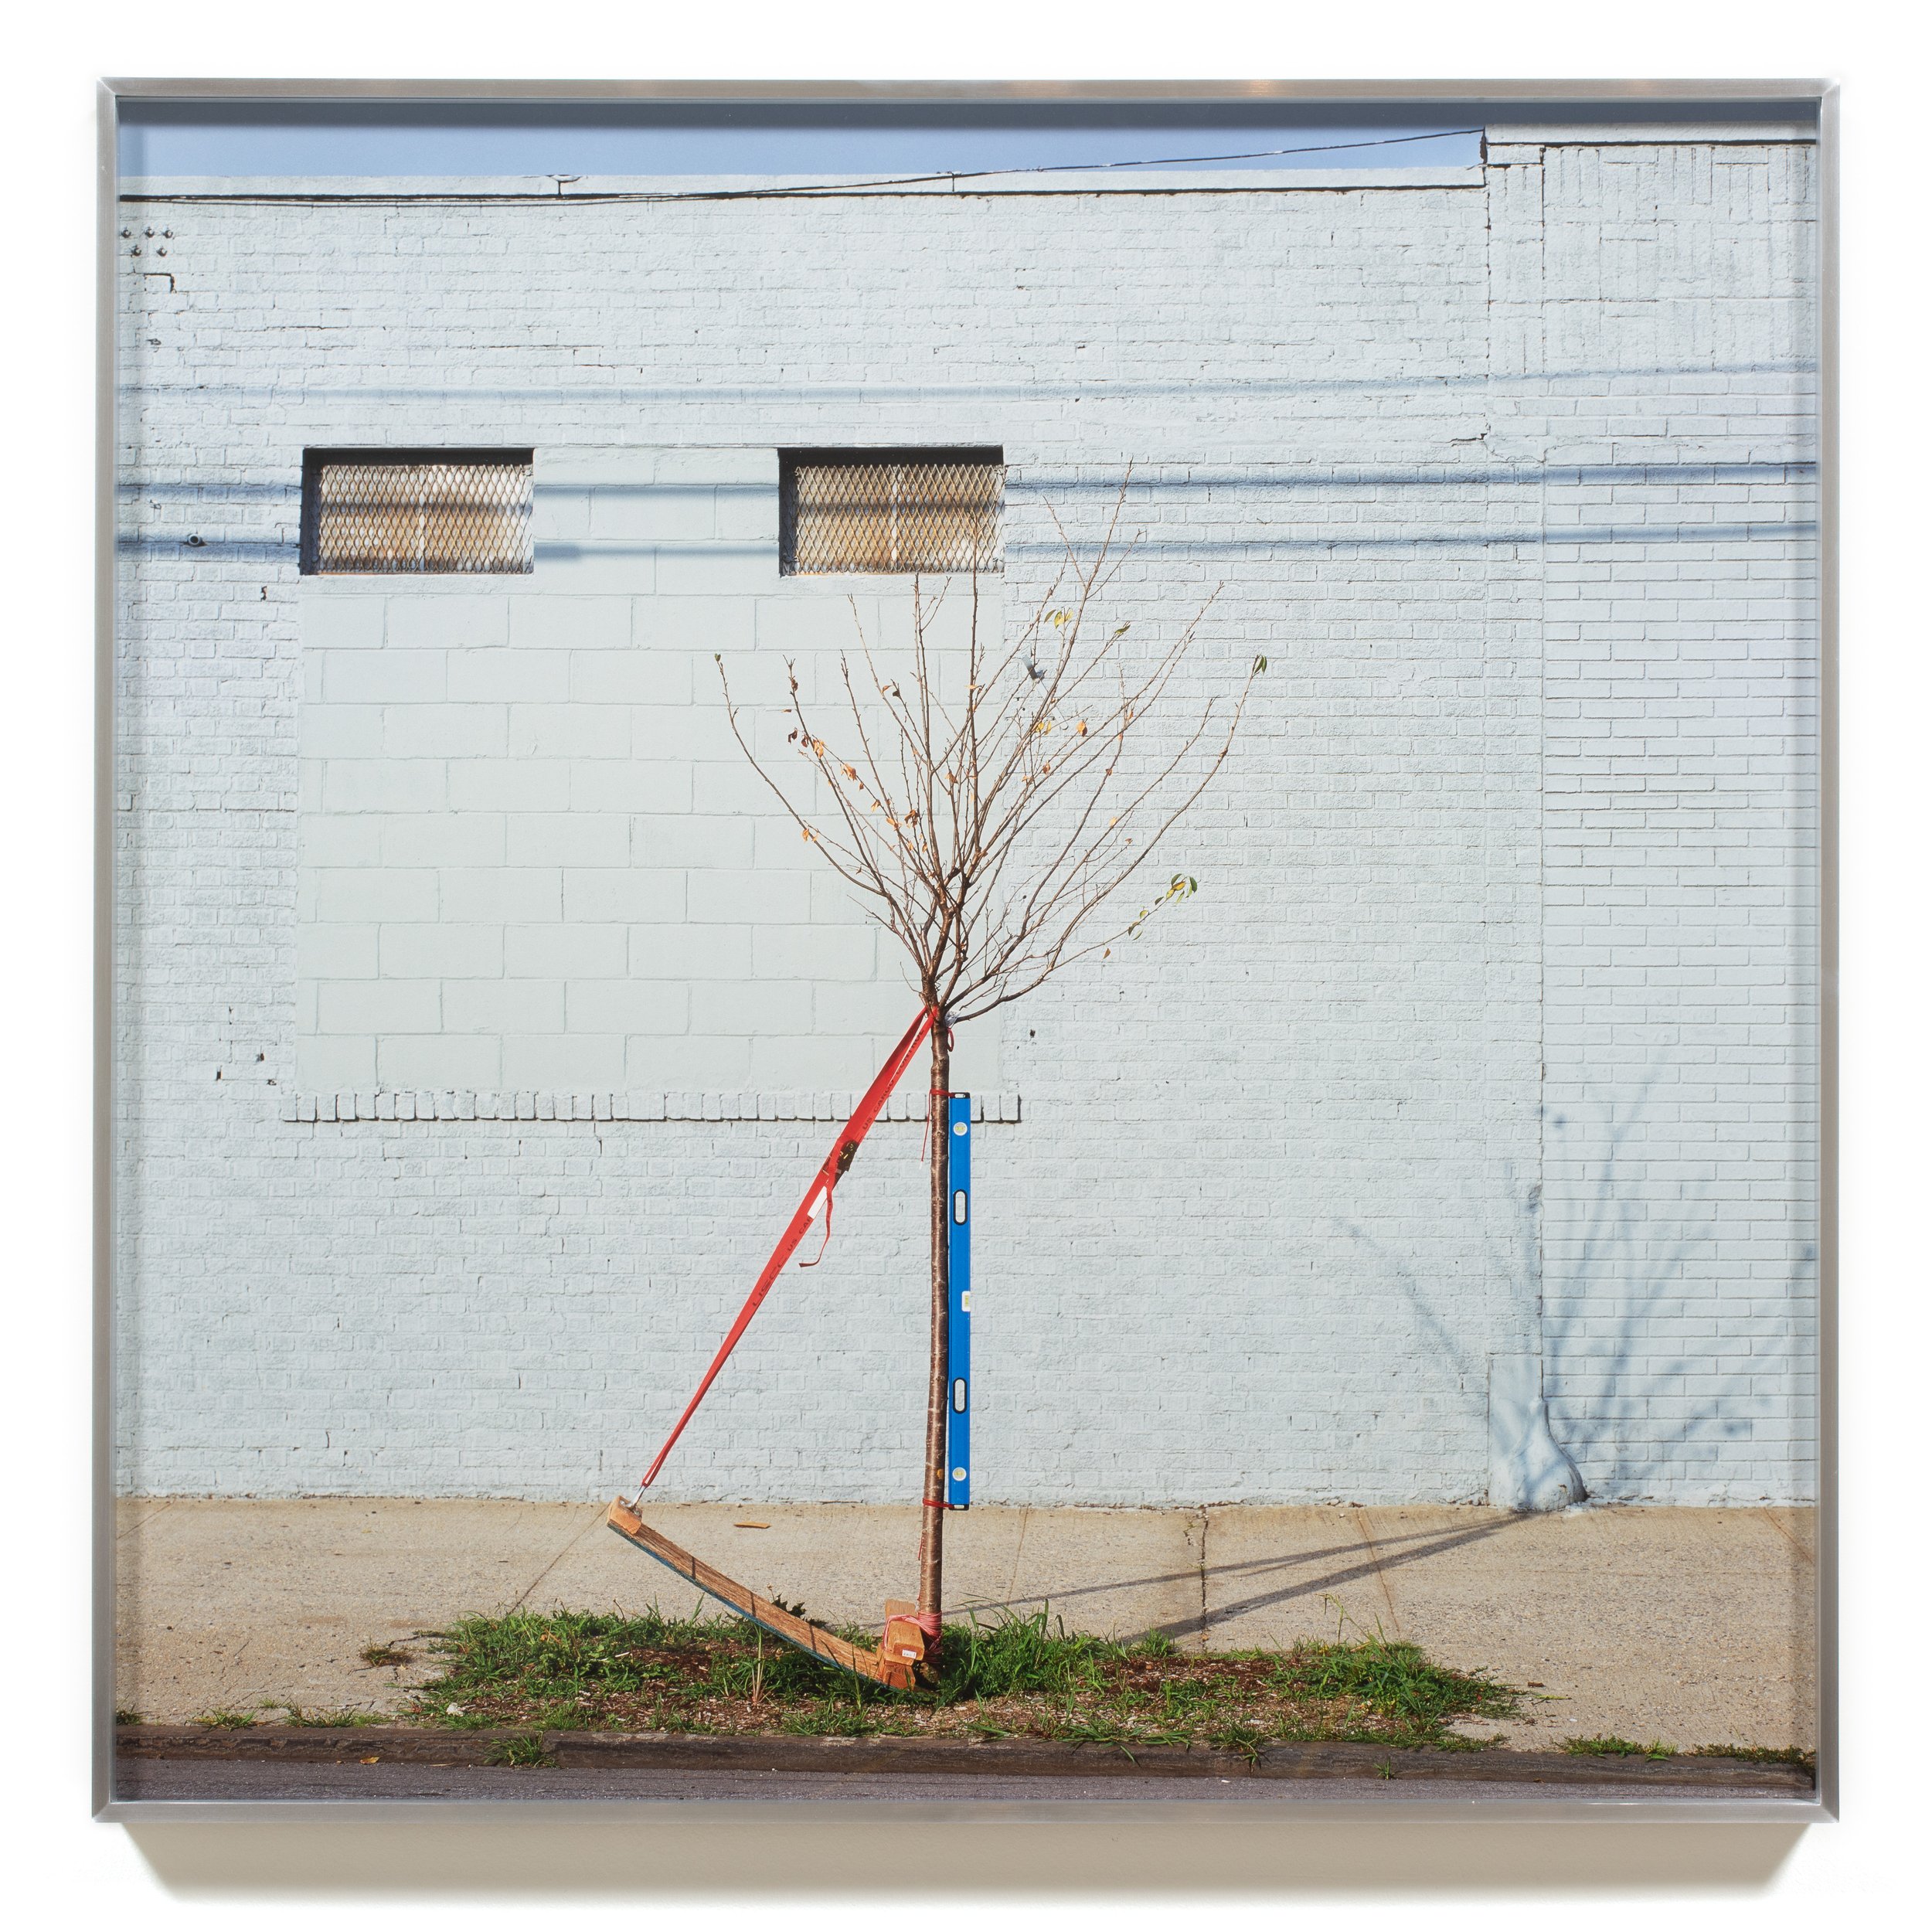  Rachael Browning  #52 07 , 2020 Archival pigment print 30 1/4 x 30 1/4 x 1 1/2 inches (framed) 